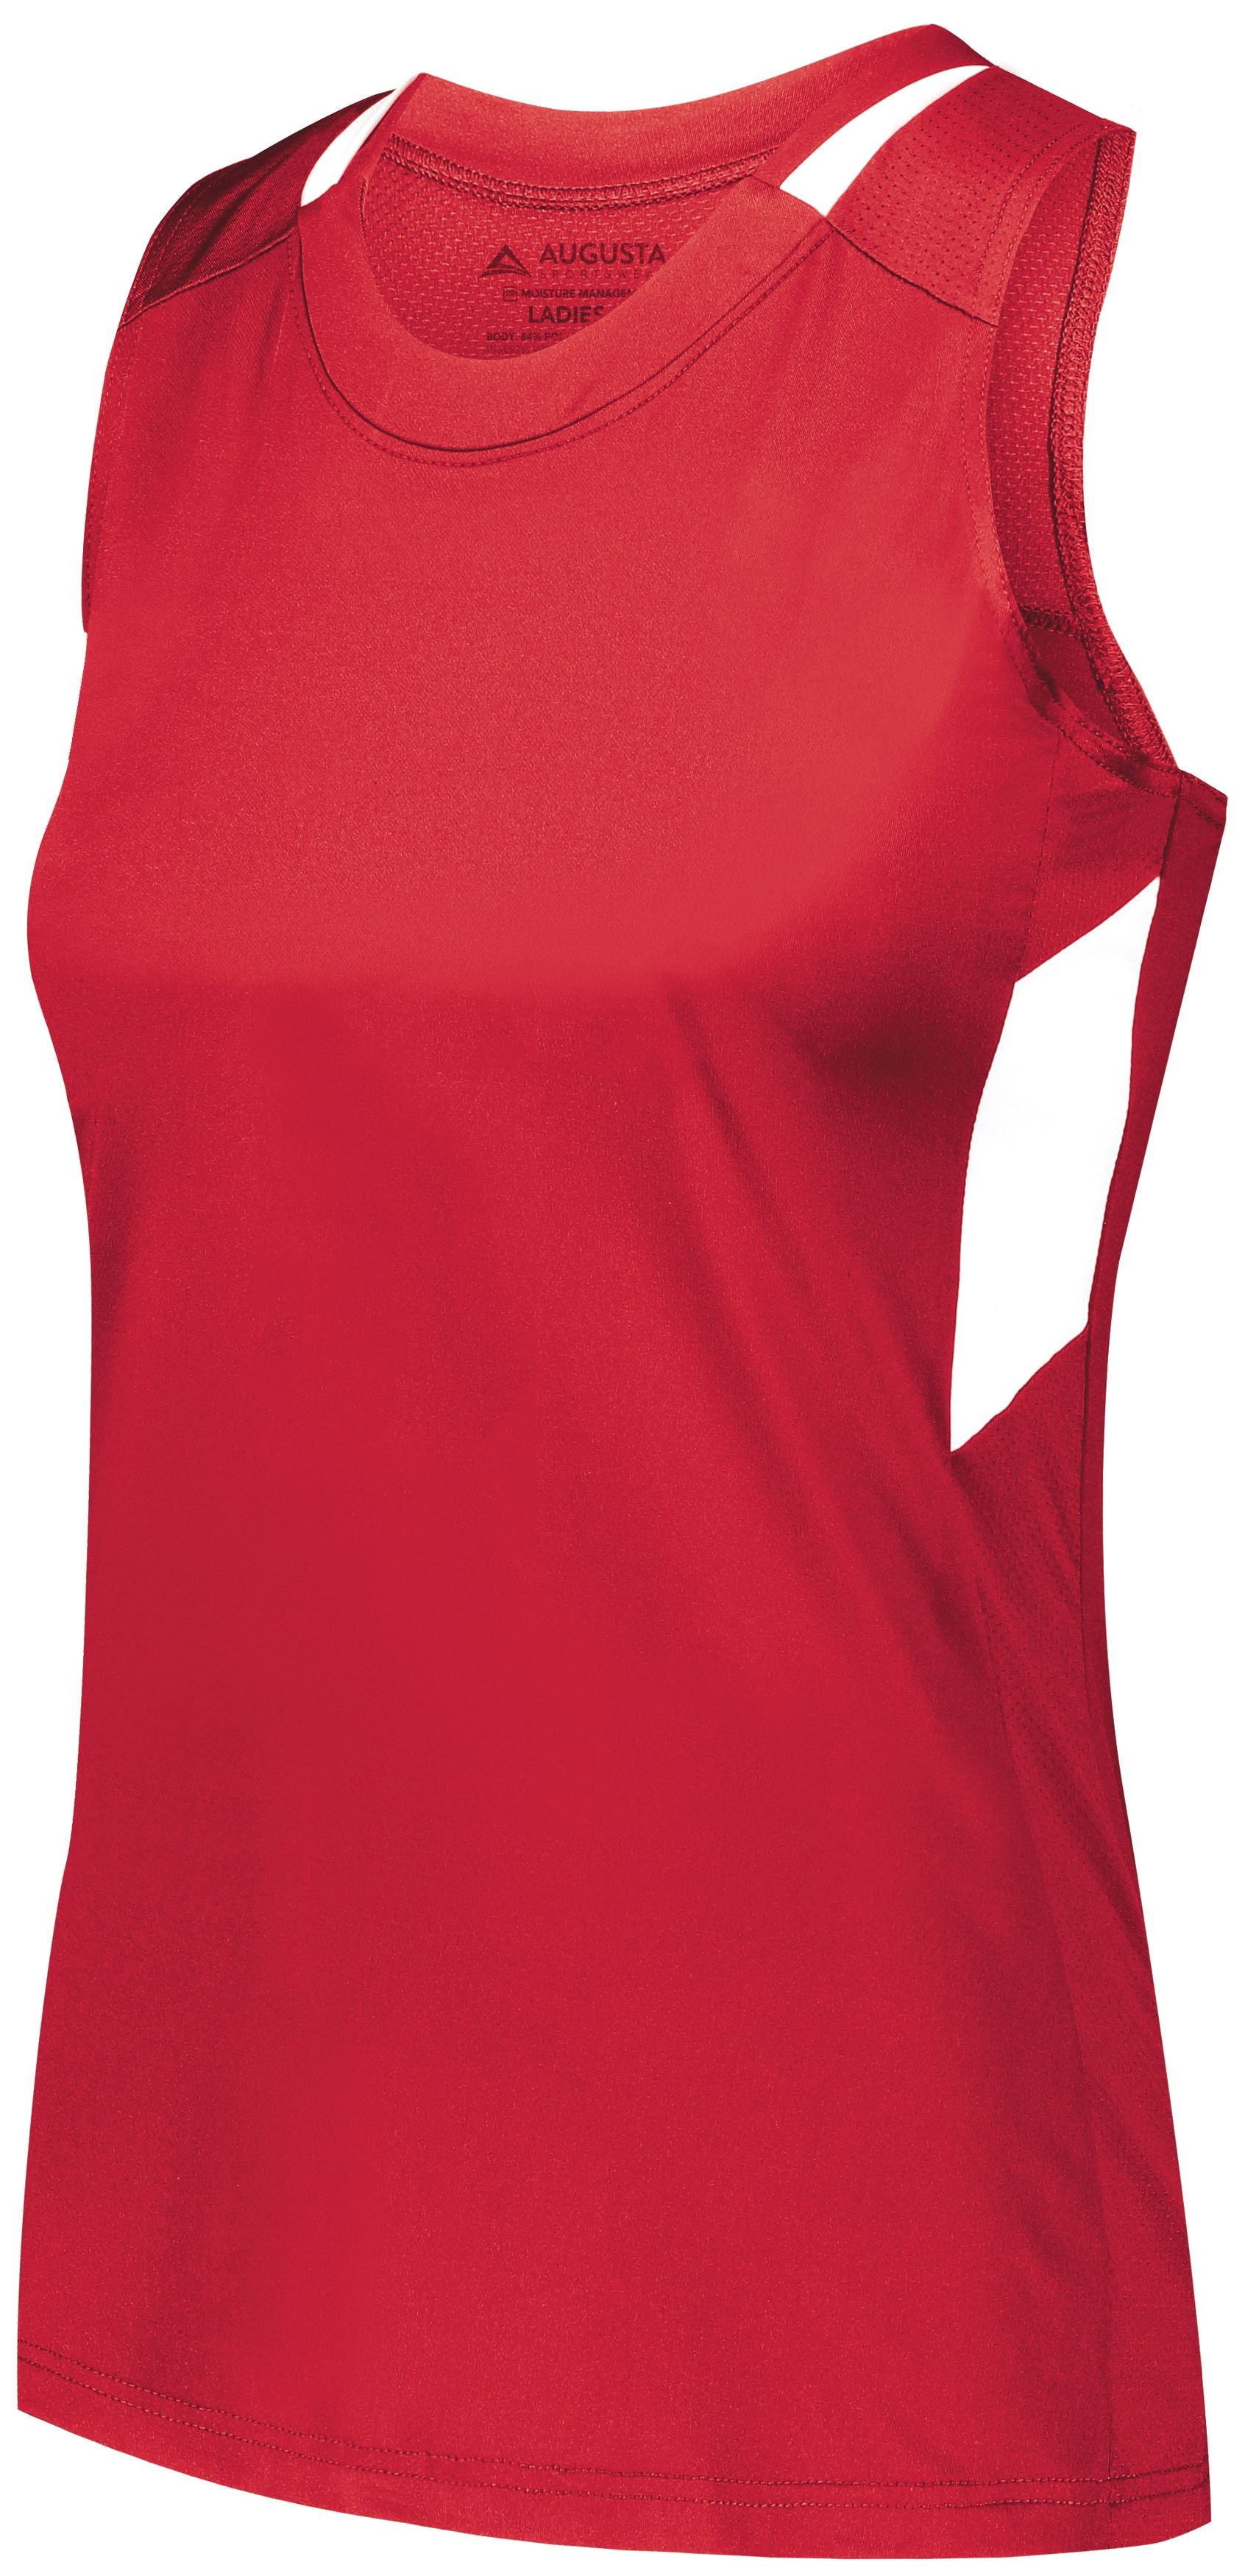 Augusta Sportswear Girls Crossover Tank in Red/White  -Part of the Girls, Augusta-Products, Lacrosse, Girls-Tank, Shirts, All-Sports, All-Sports-1 product lines at KanaleyCreations.com